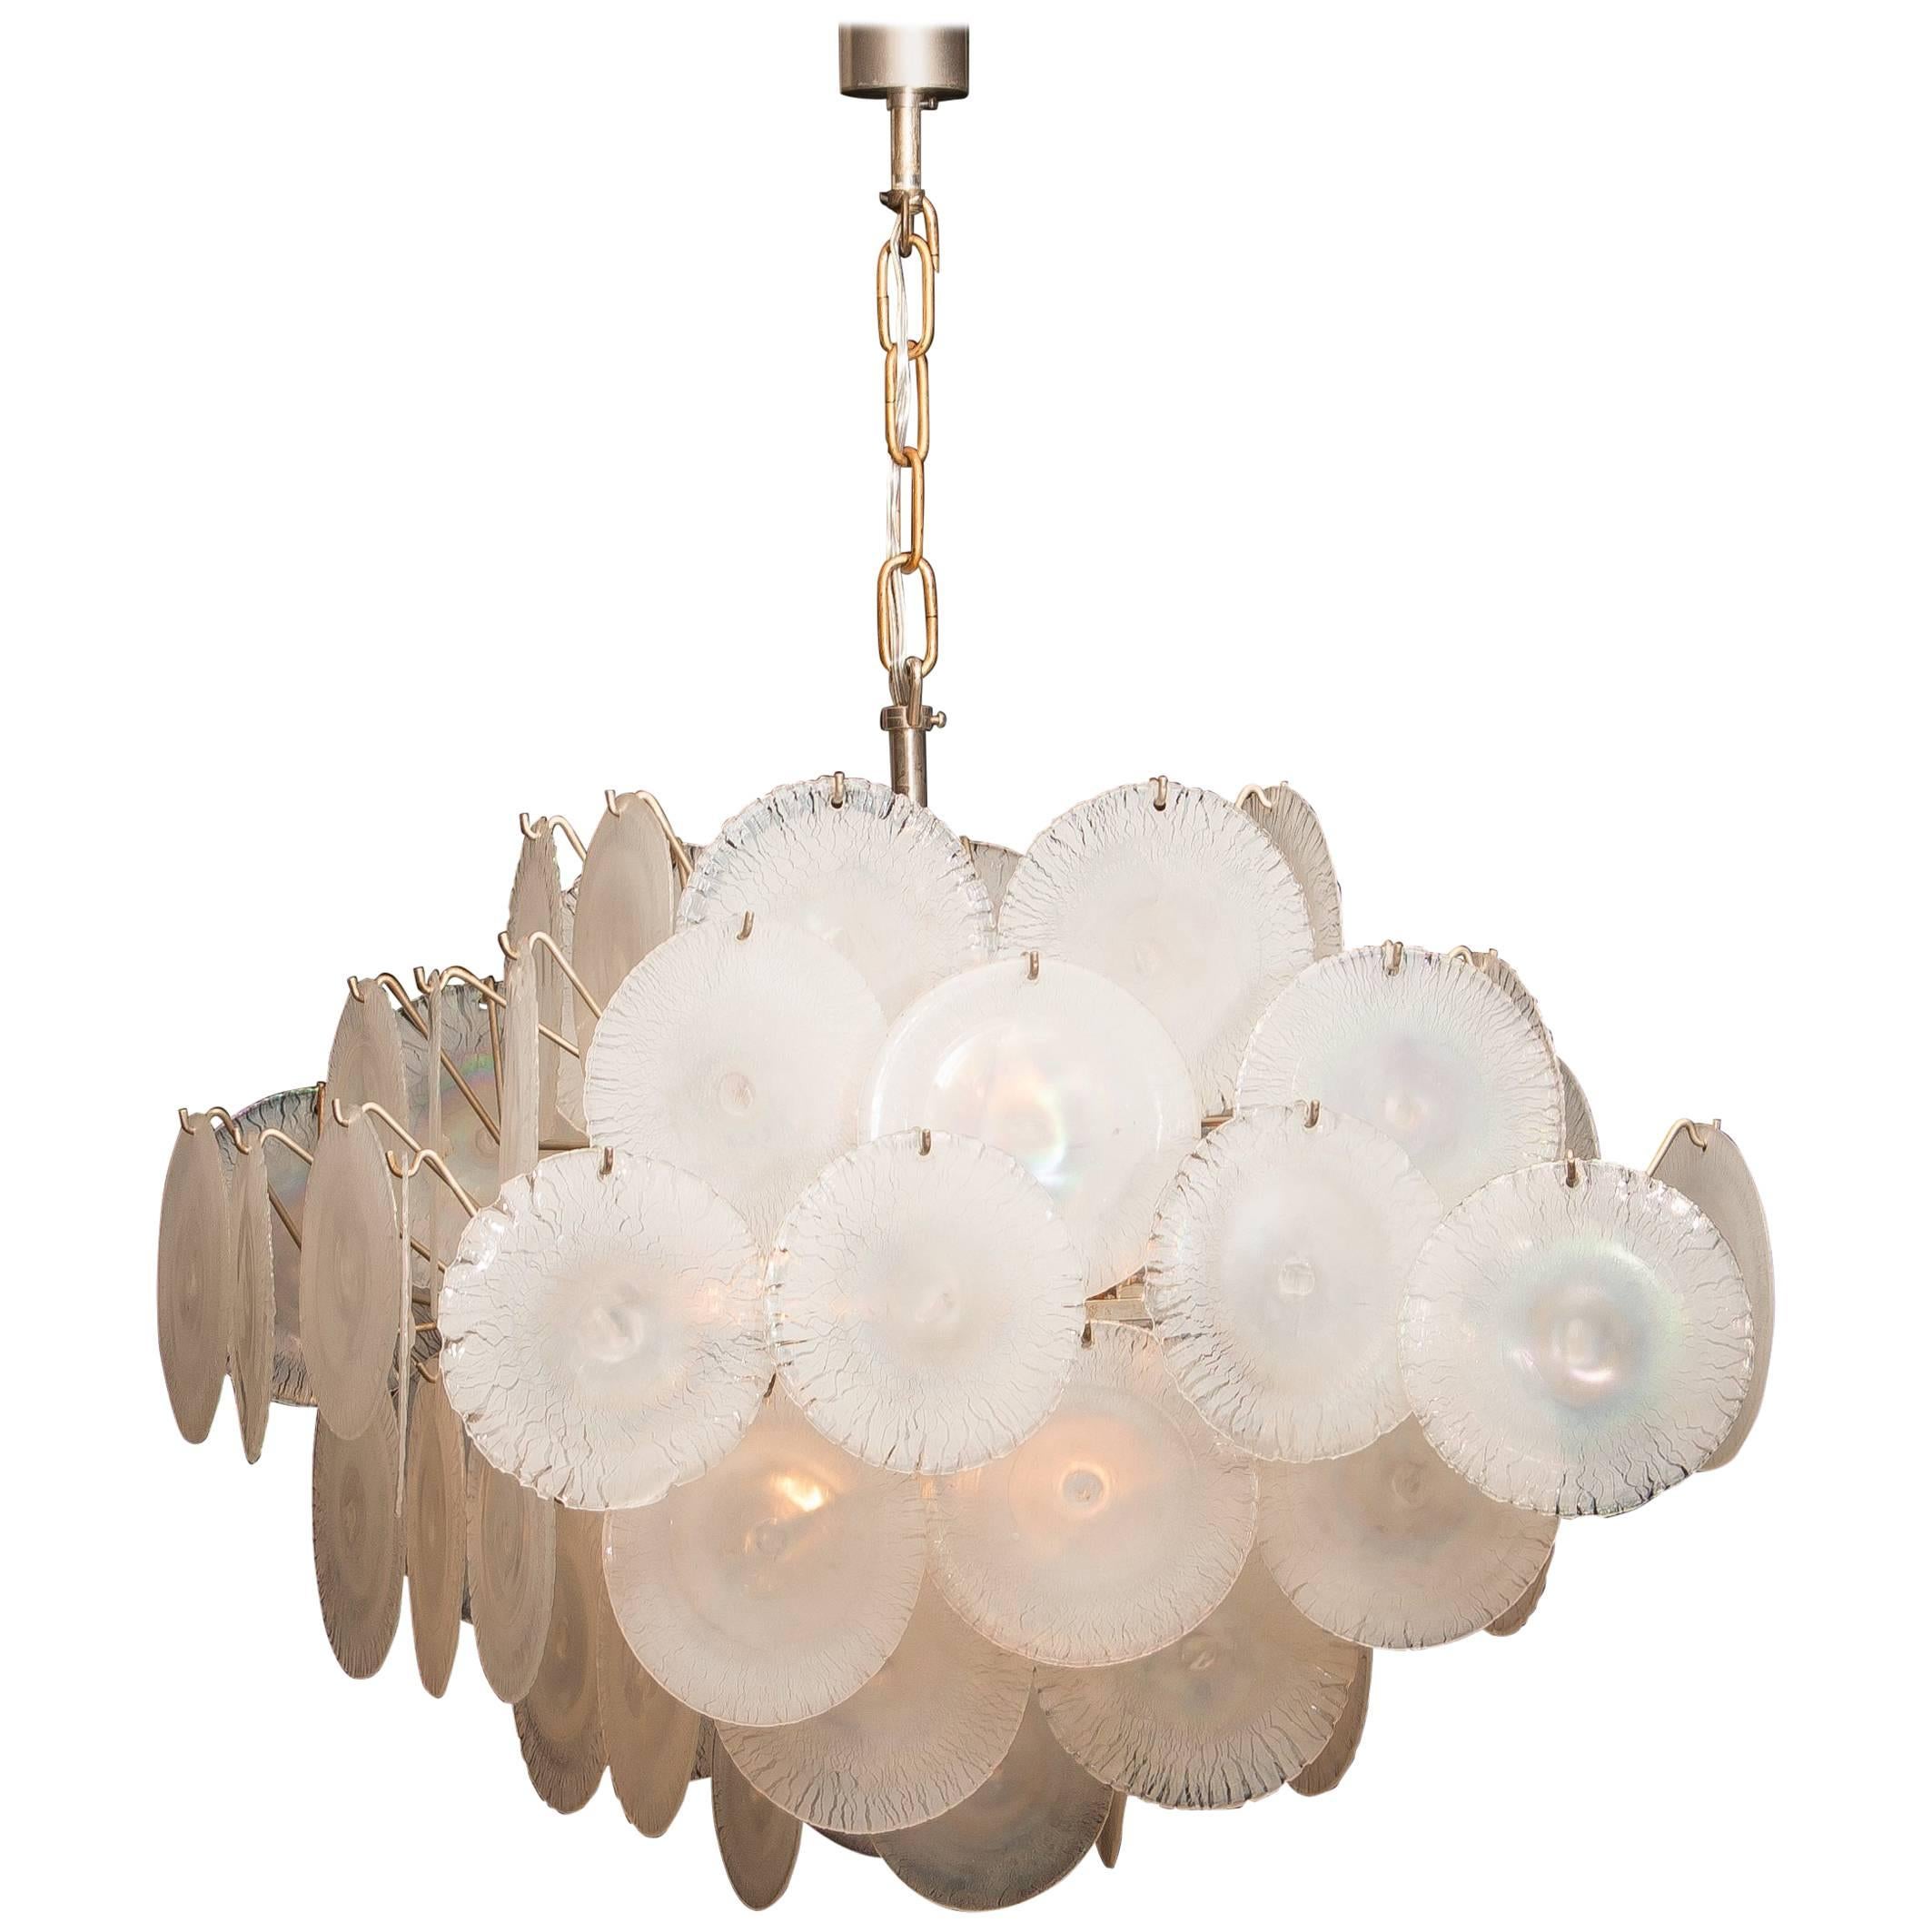 Gino Vistosi Chandelier with White or Pearl Murano Crystal Discs